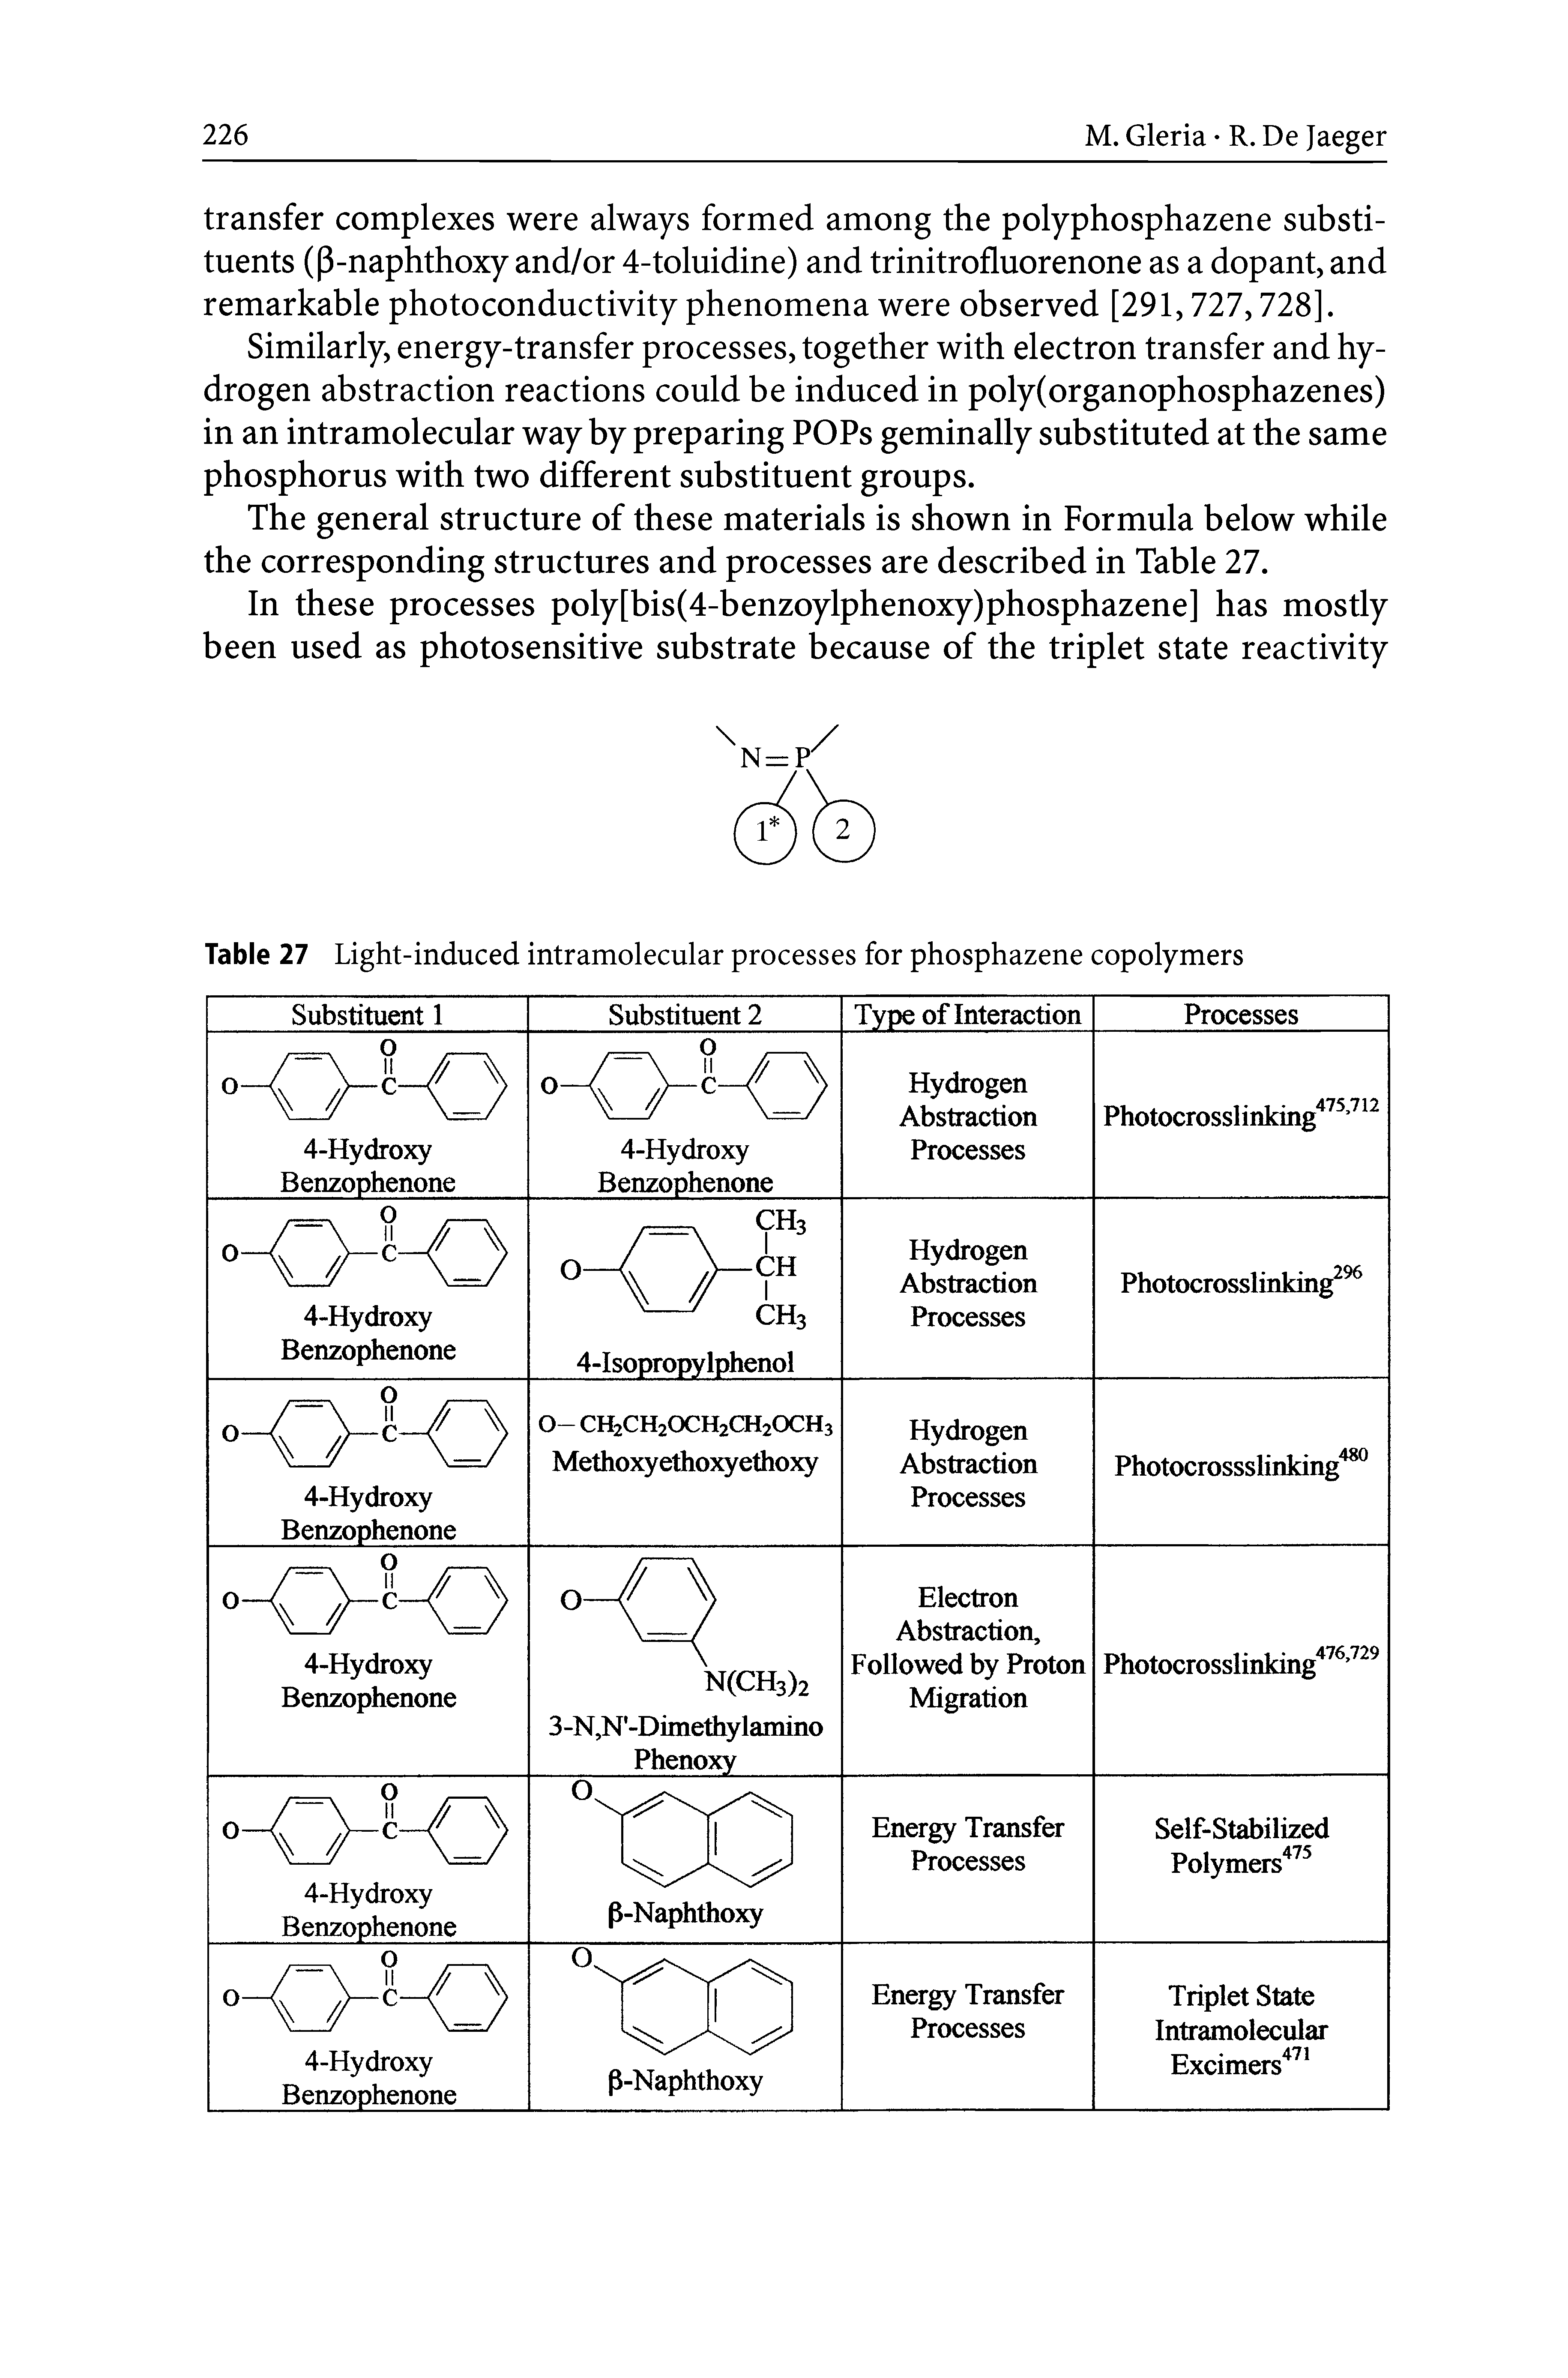 Table 27 Light-induced intramolecular processes for phosphazene copolymers...